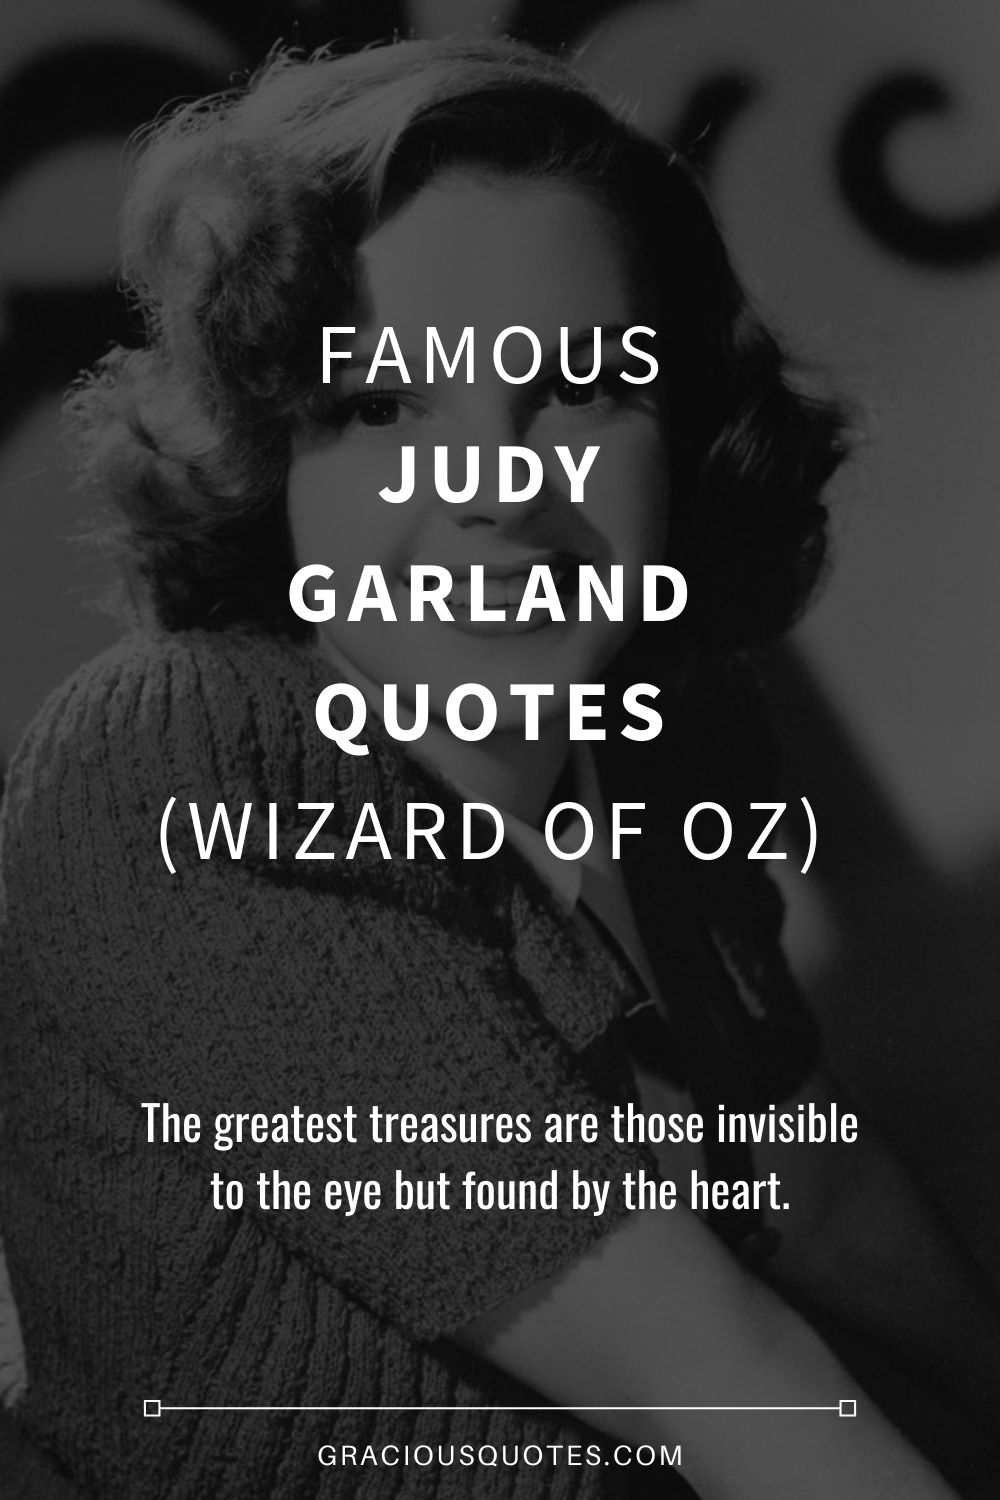 Famous Judy Garland Quotes (WIZARD OF OZ) - Gracious Quotes